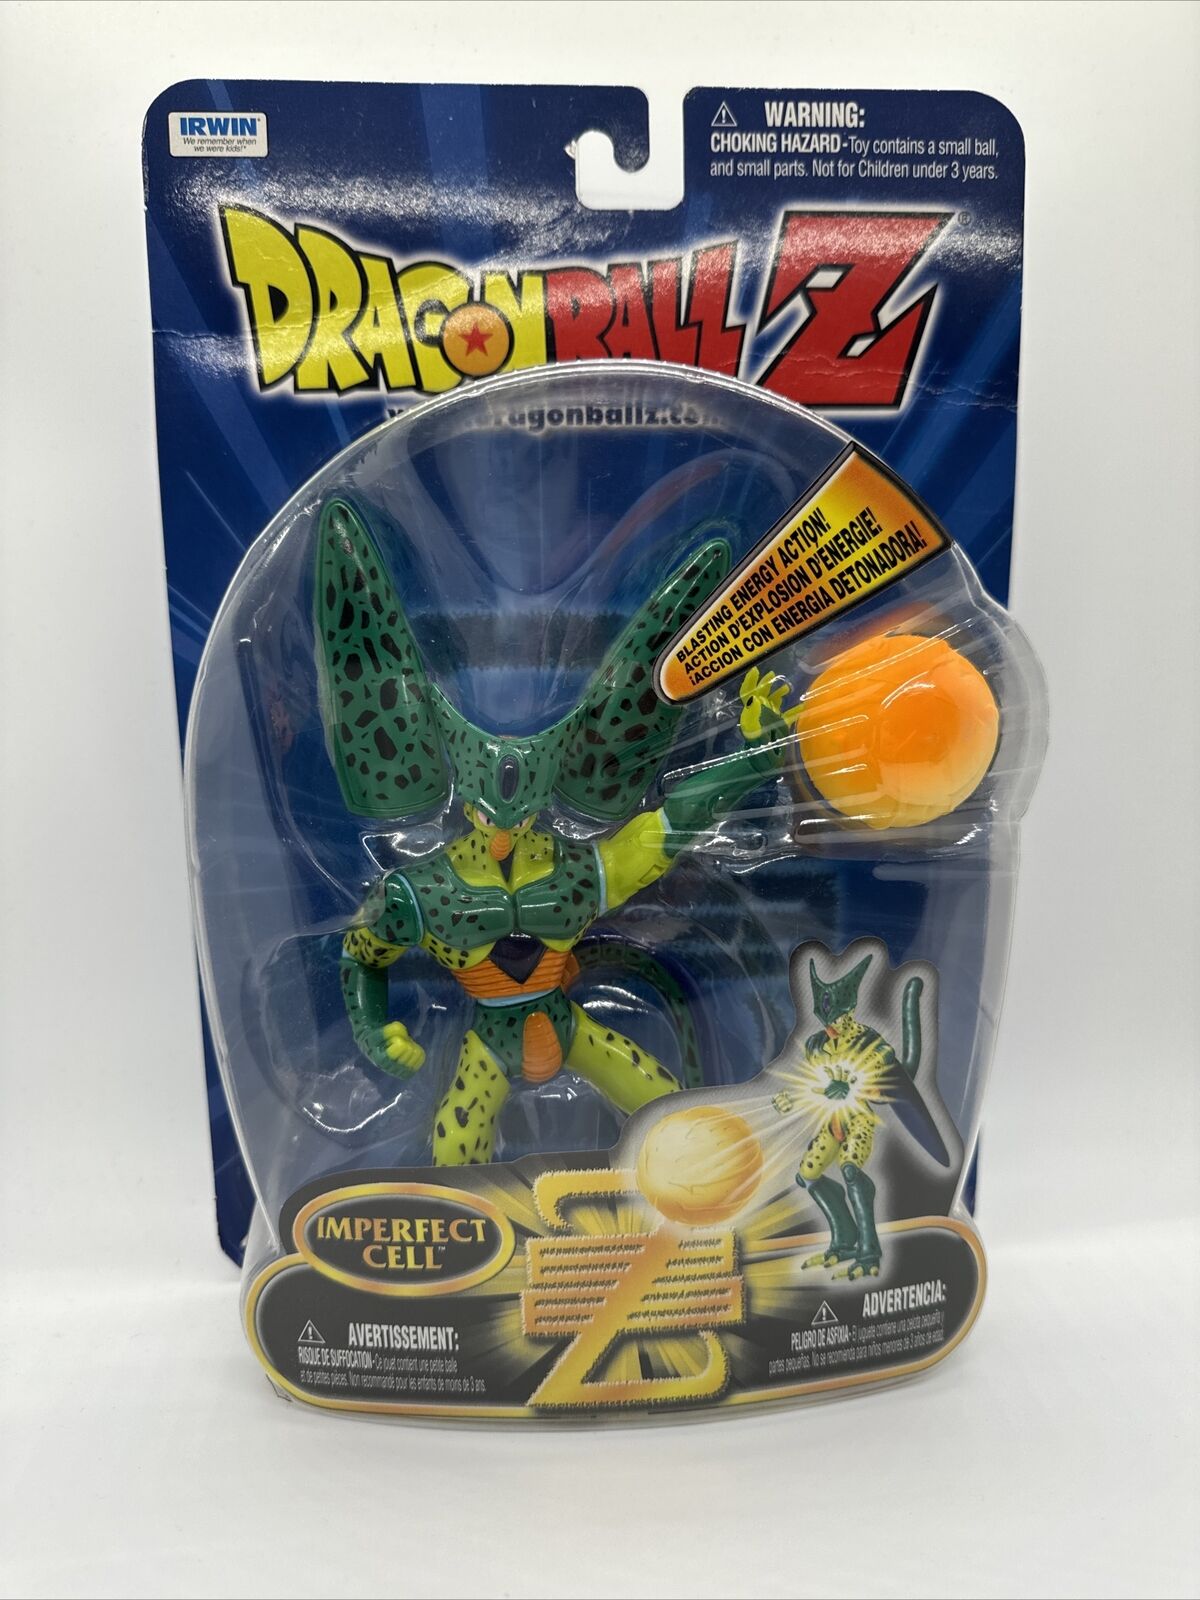 DragonBall Z Imperfect Cell Action Figure w/ Blasting Energy Action dbz toy NIB